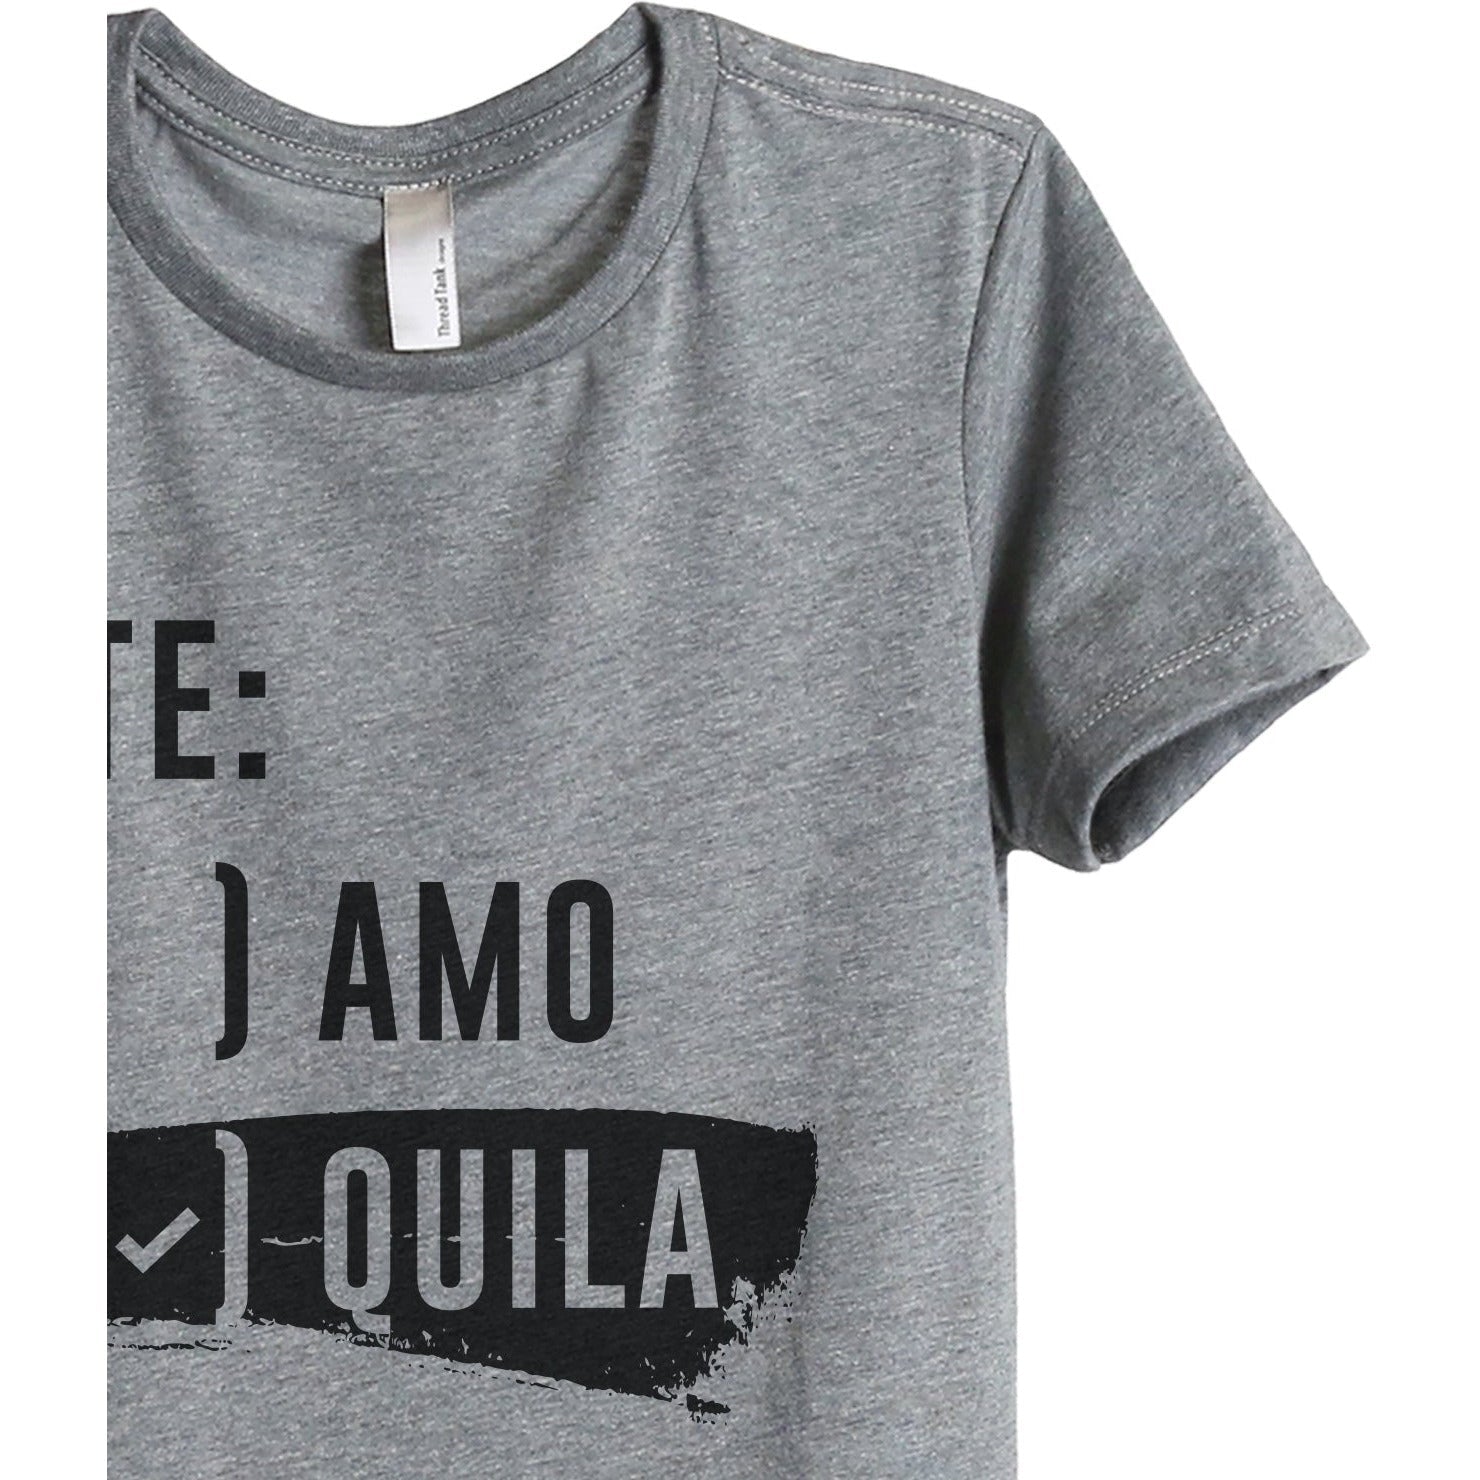 Te Quila - Stories You Can Wear